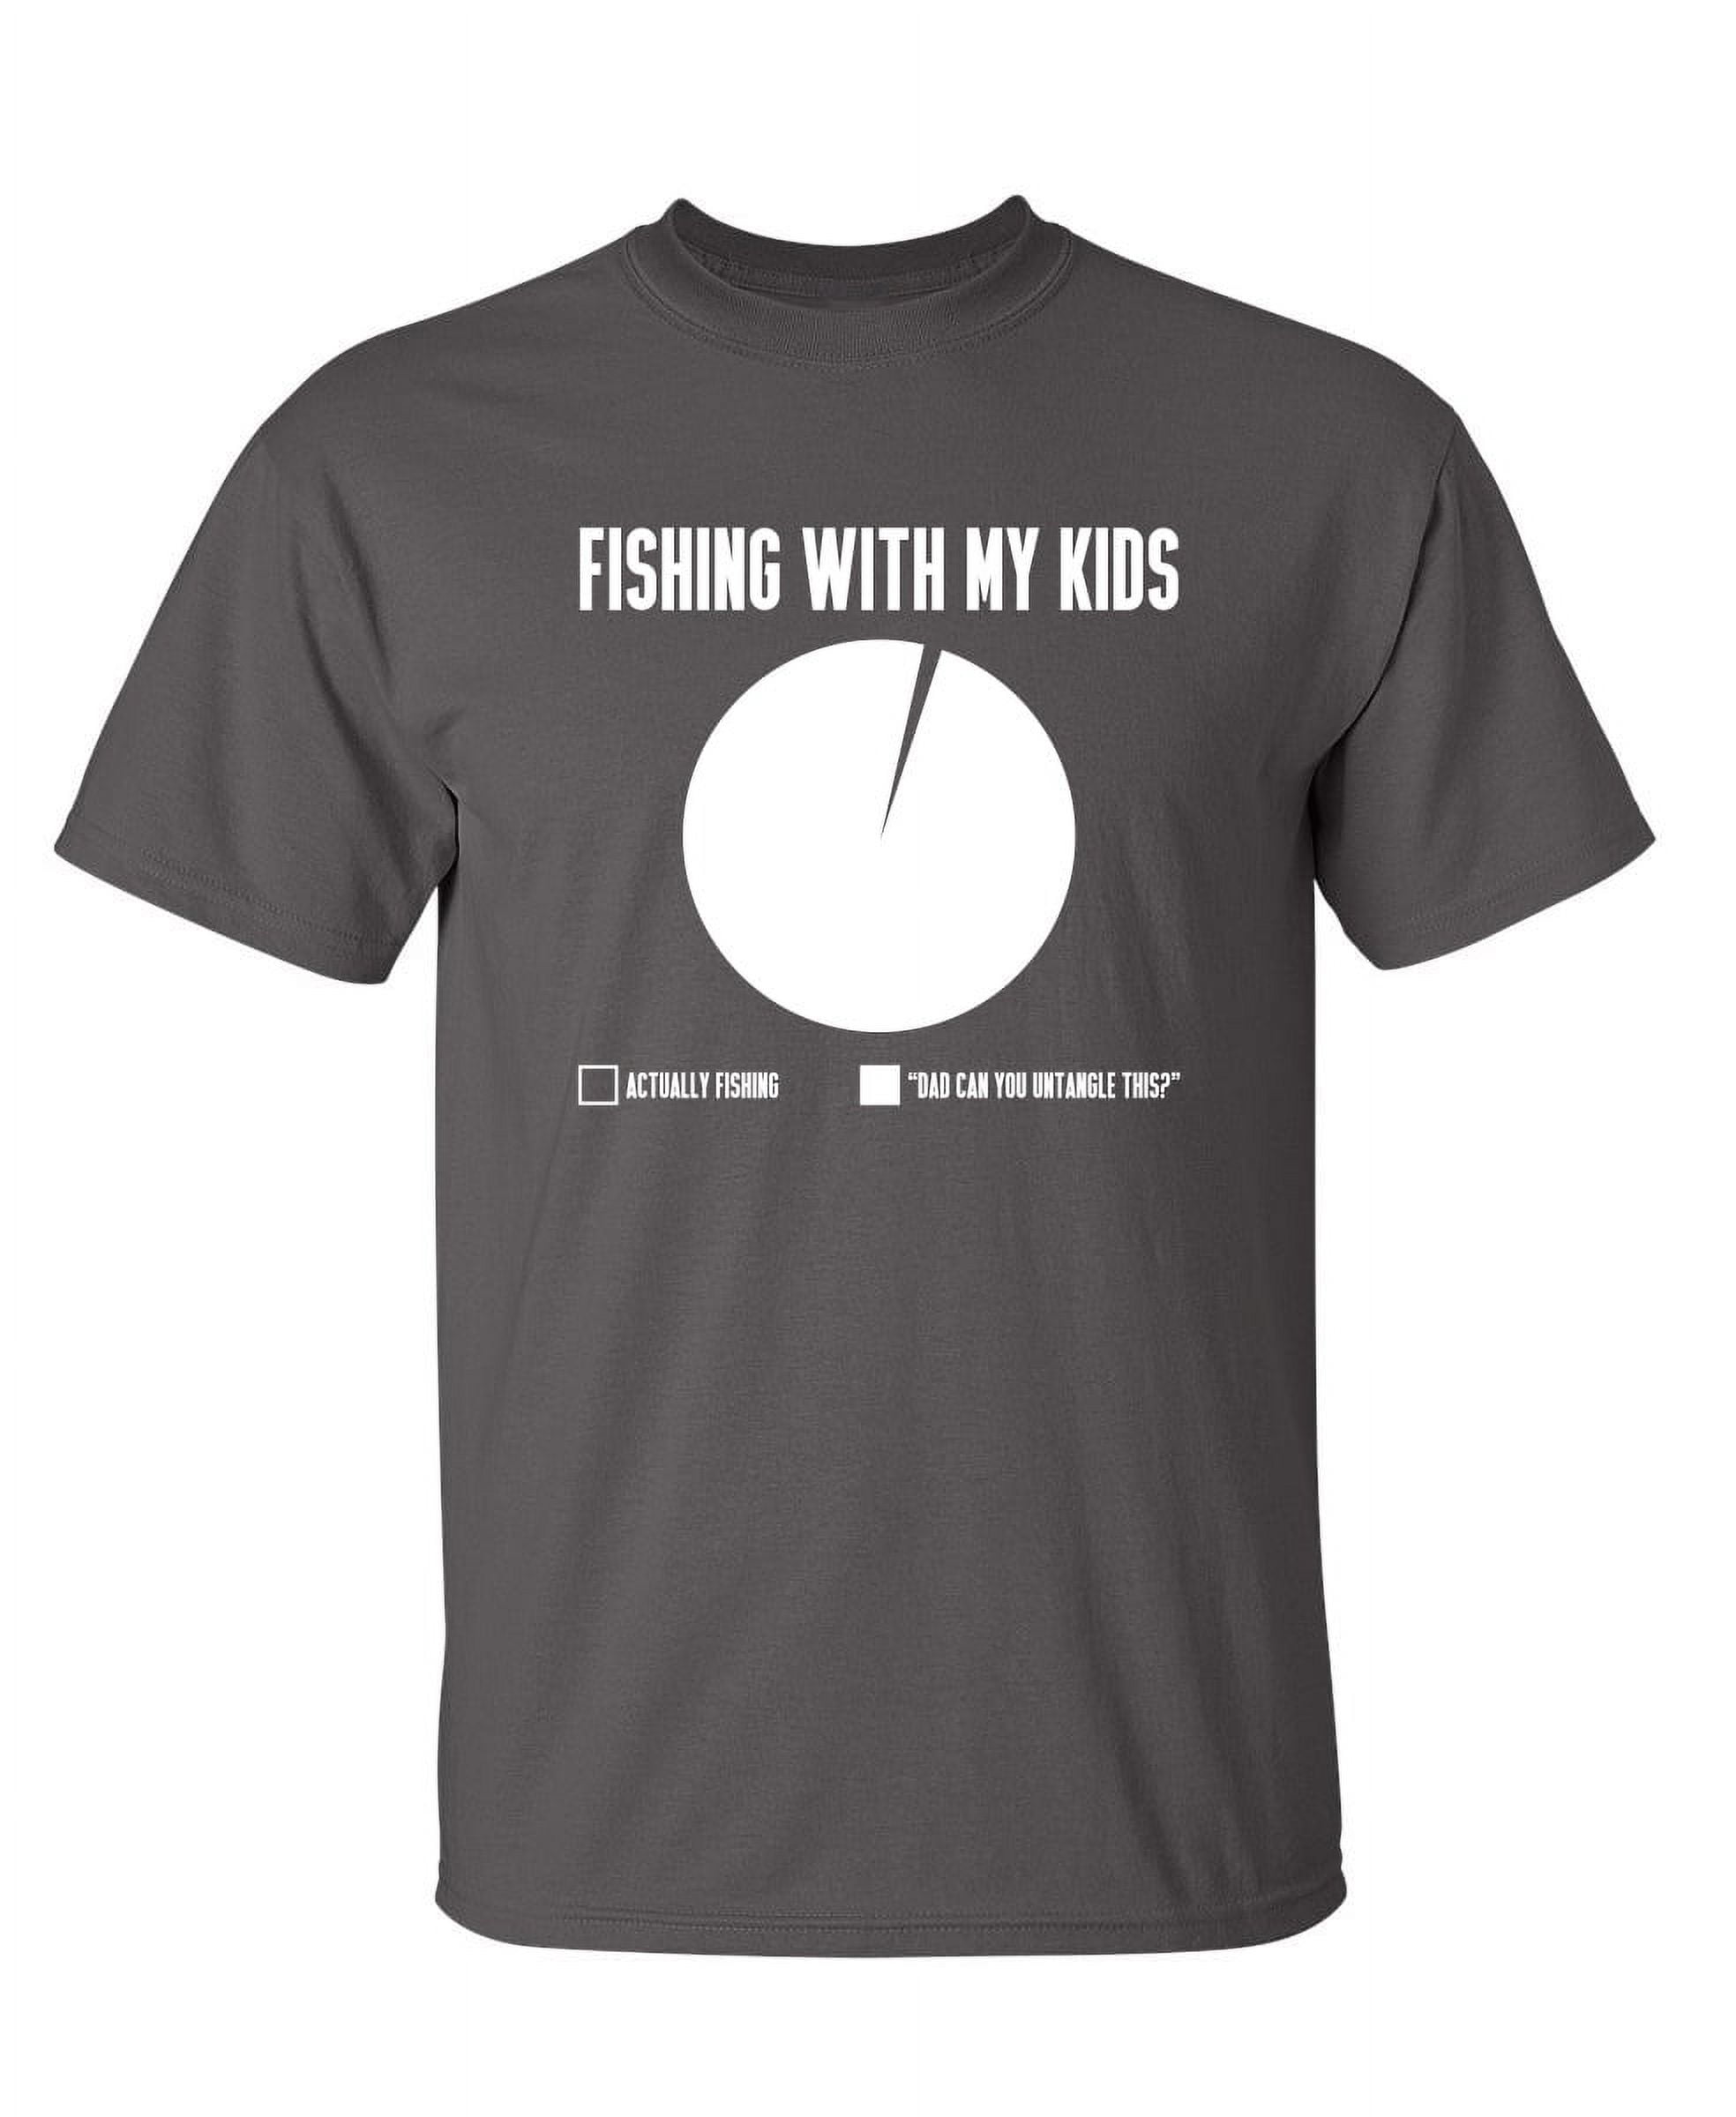 Fishing With My Kids Sarcastic Premium T Shirt Adult Humor Funny Saying  Graphic Tee For Xmas Pre Birthday Anniversary Gift Hilarious Novelty Tshirt  